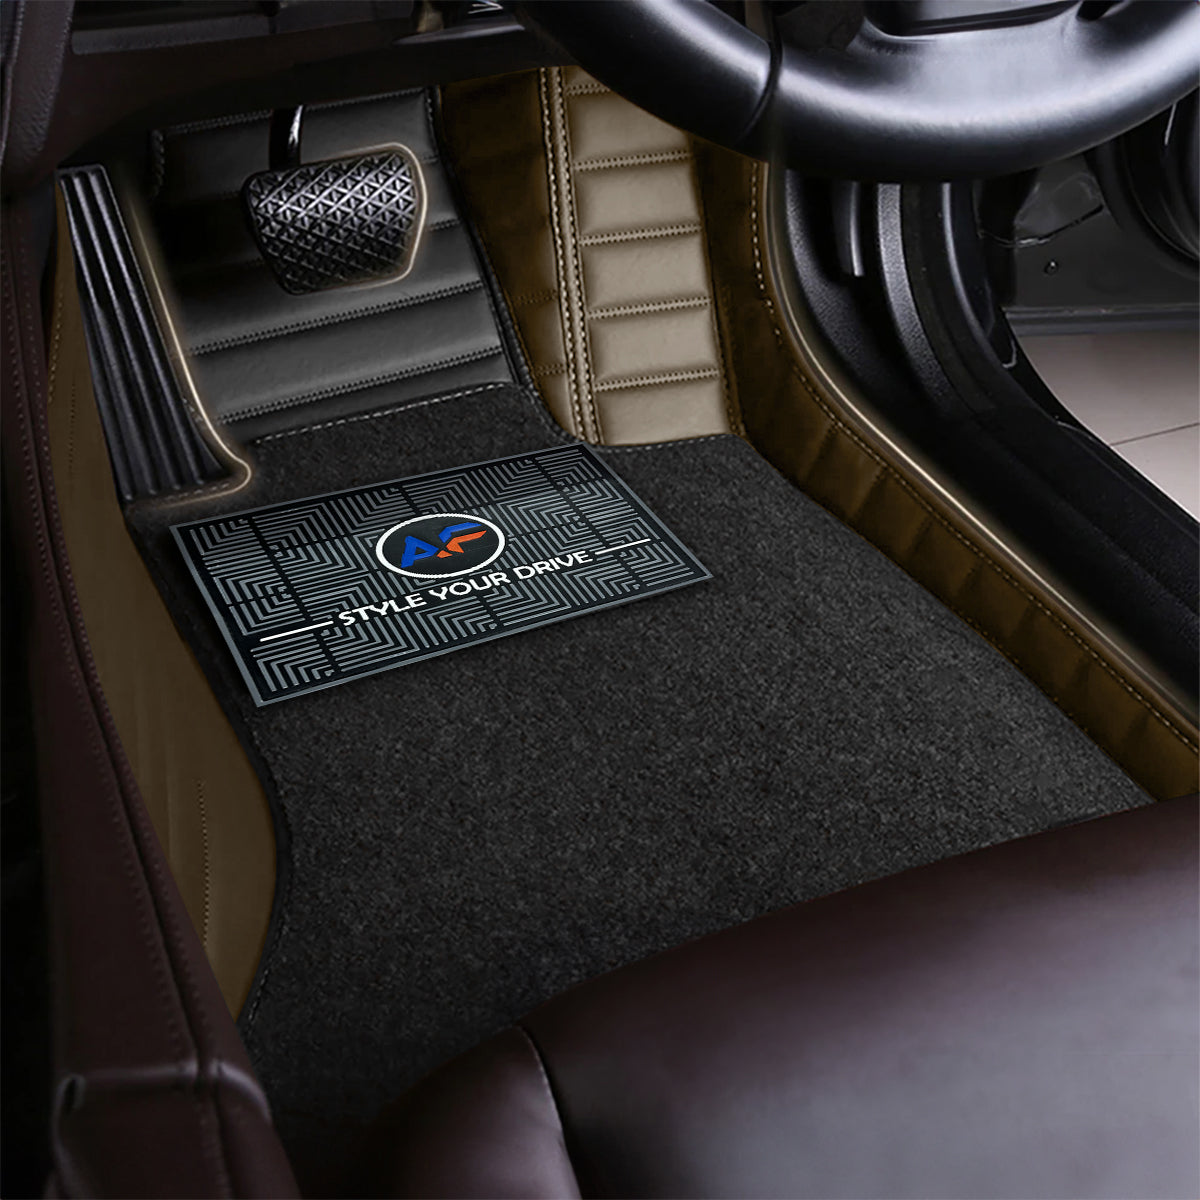 Autofurnish 9D Combination Custom Fitted Car Mats For Mercedes S350 2021 - Black VT-Coffee